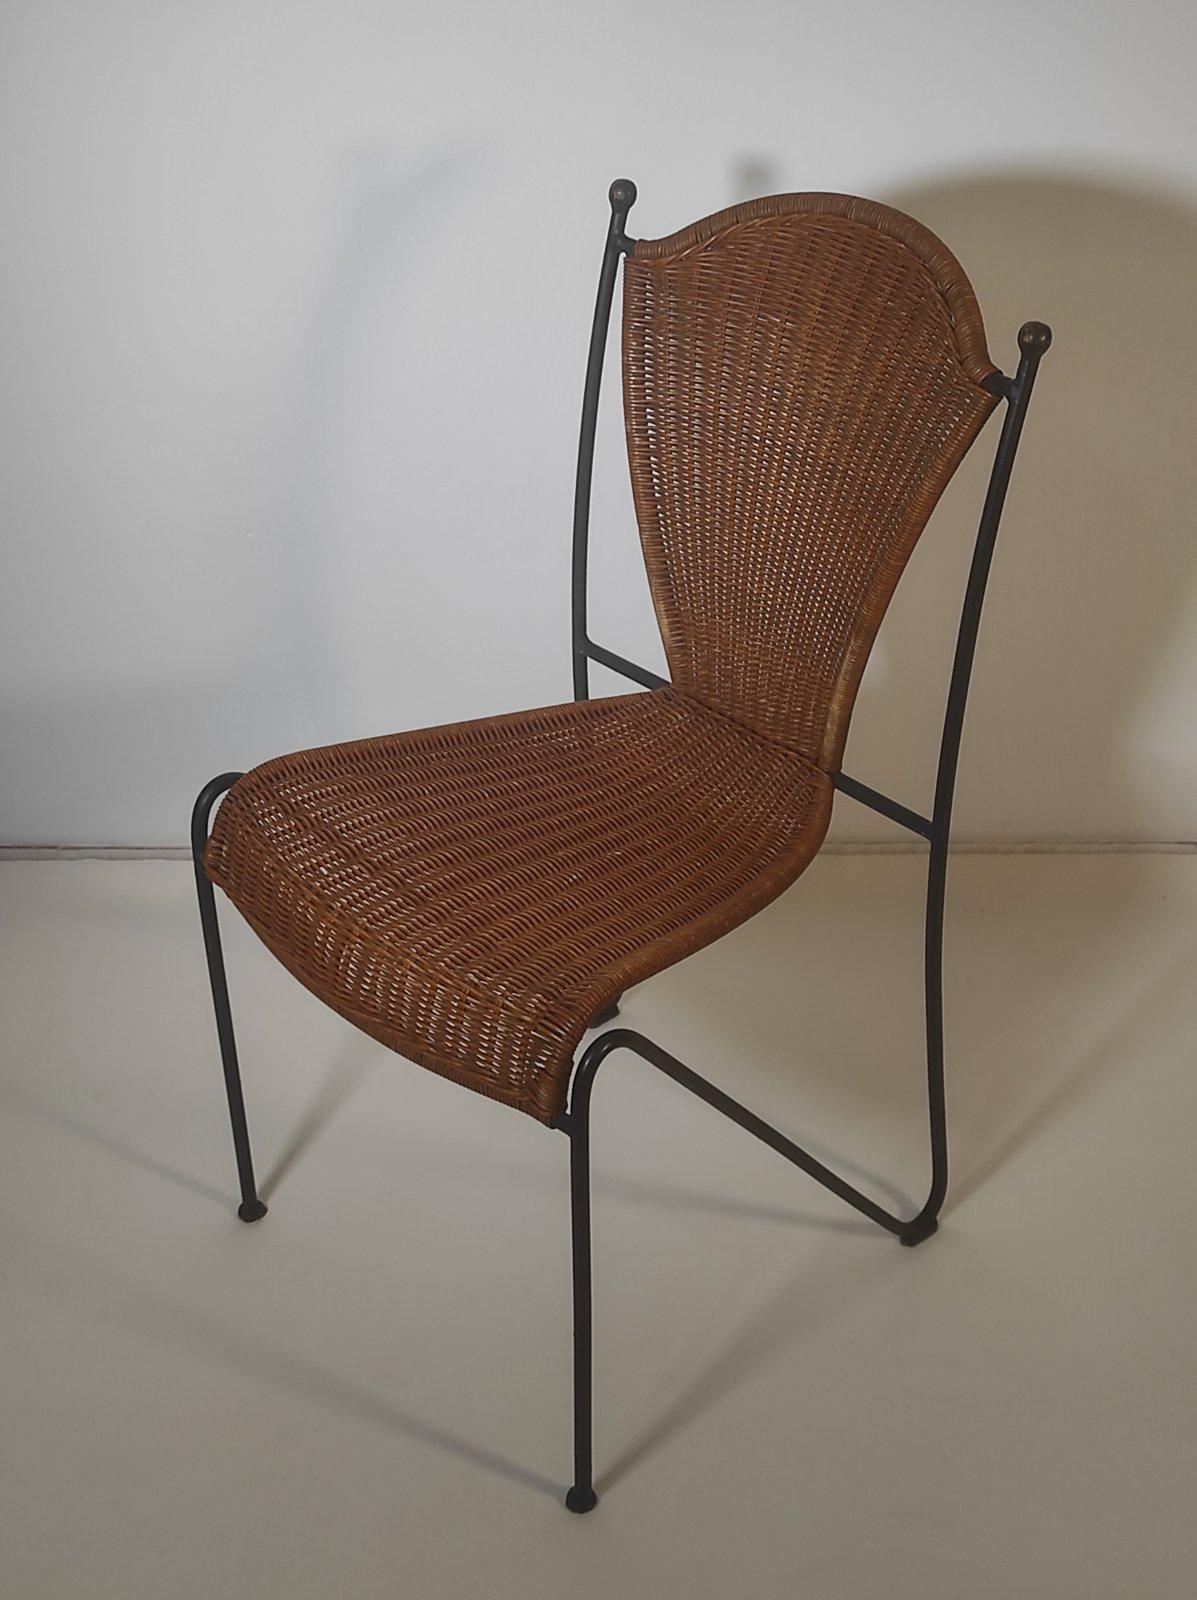 Mid-Century Modern Frederic Weinberg Wicker and Iron Chair 1950s